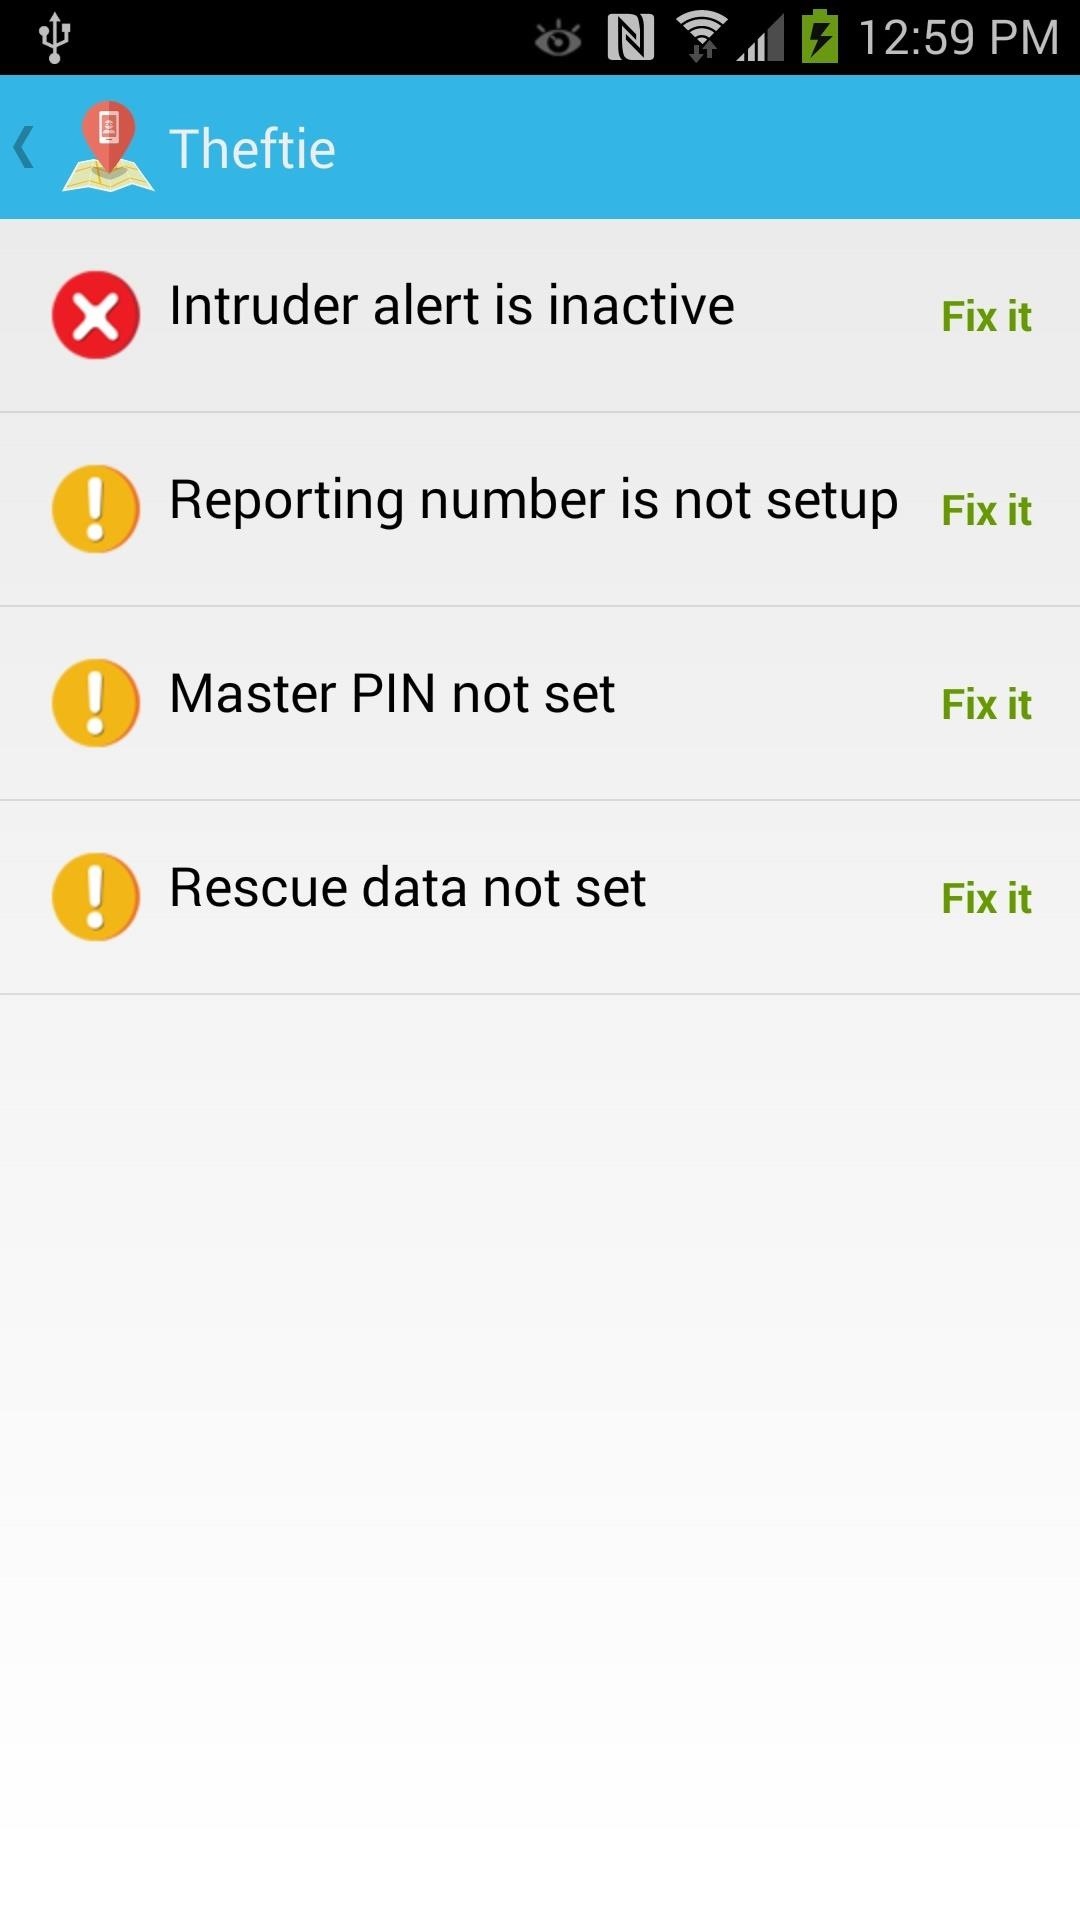 How to Find Your Missing Android Phone, Wipe It Clean, Disable USB, Capture Thief Selfies, & More